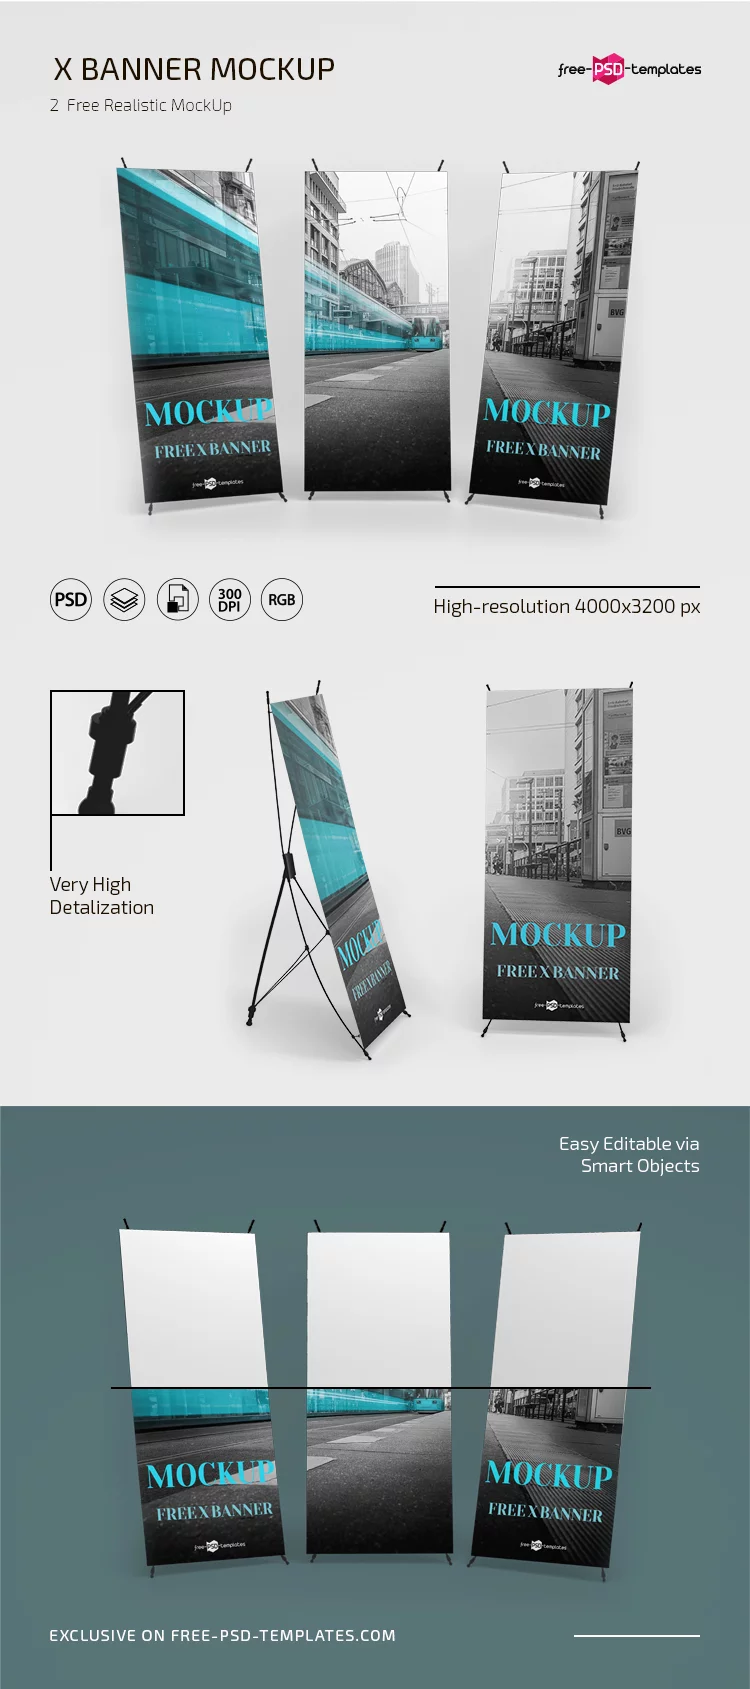 Free X Banner Mockup in PSD